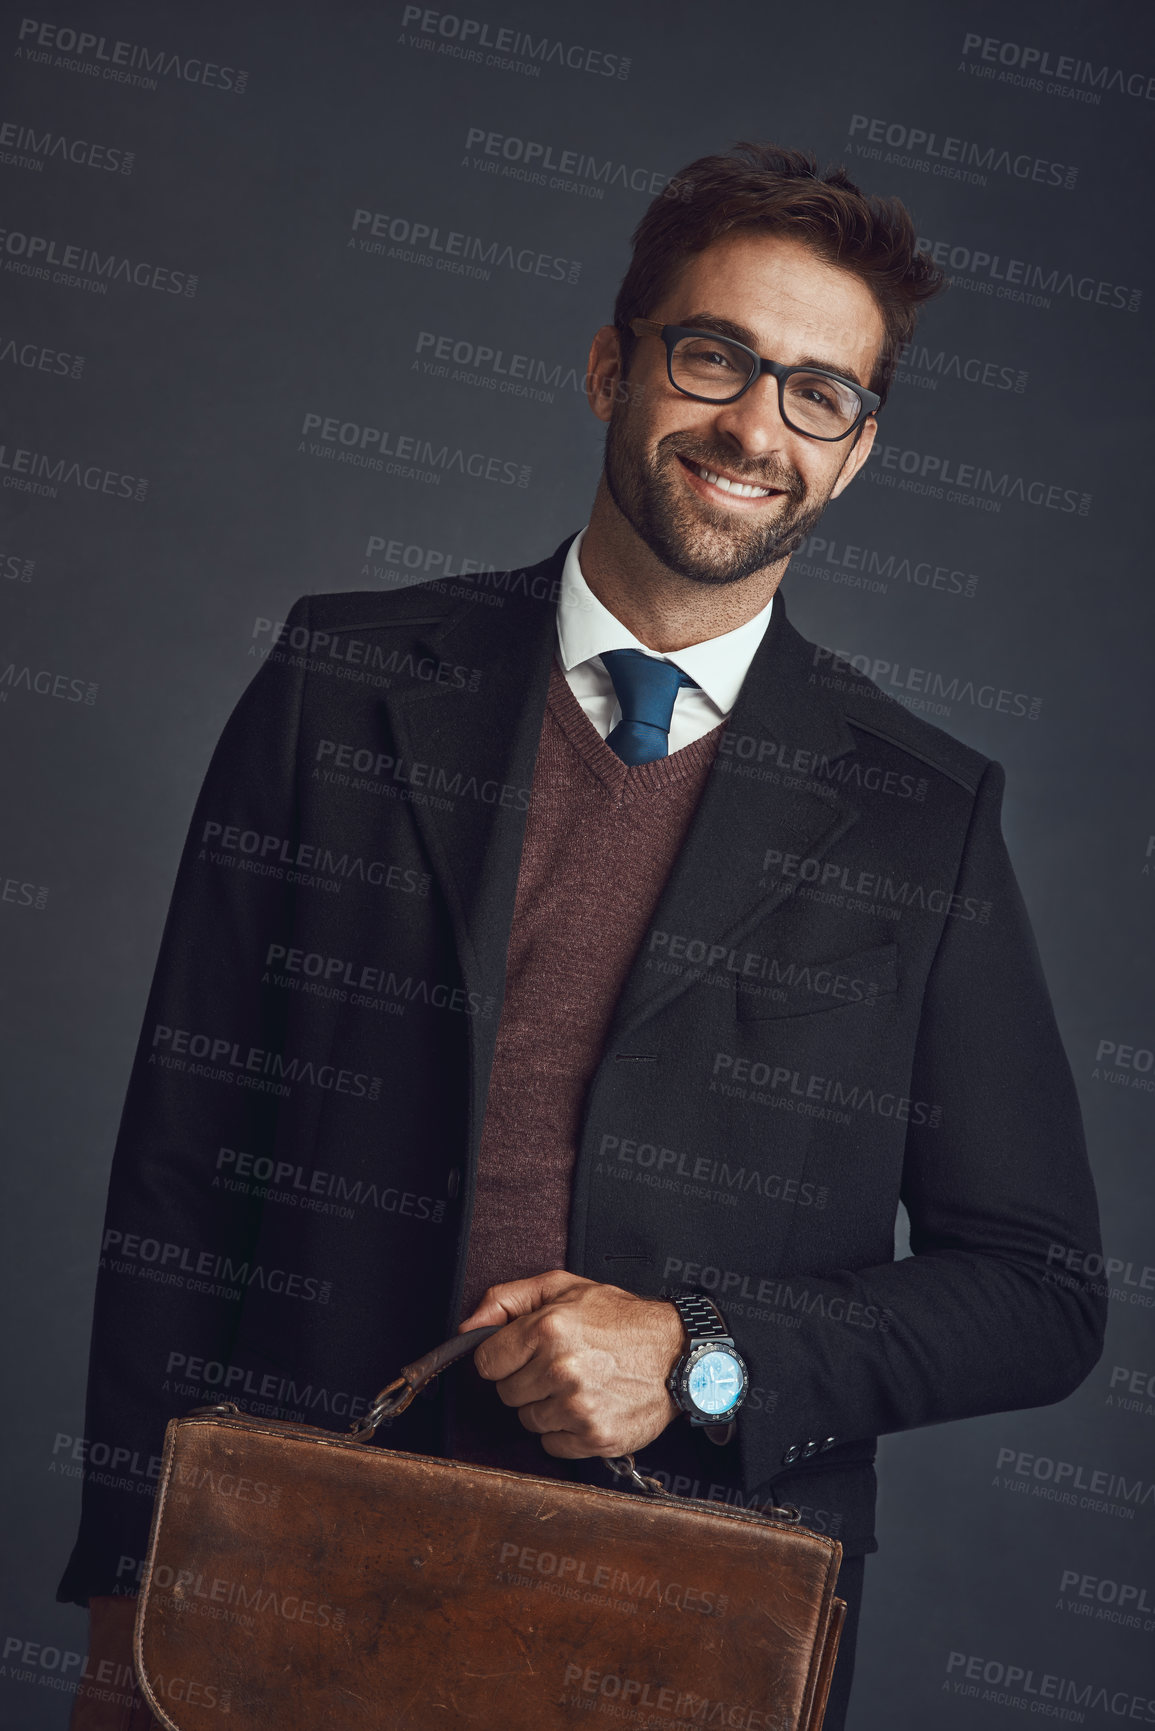 Buy stock photo Studio portrait of a stylishly dressed young man carrying a bag against a gray background